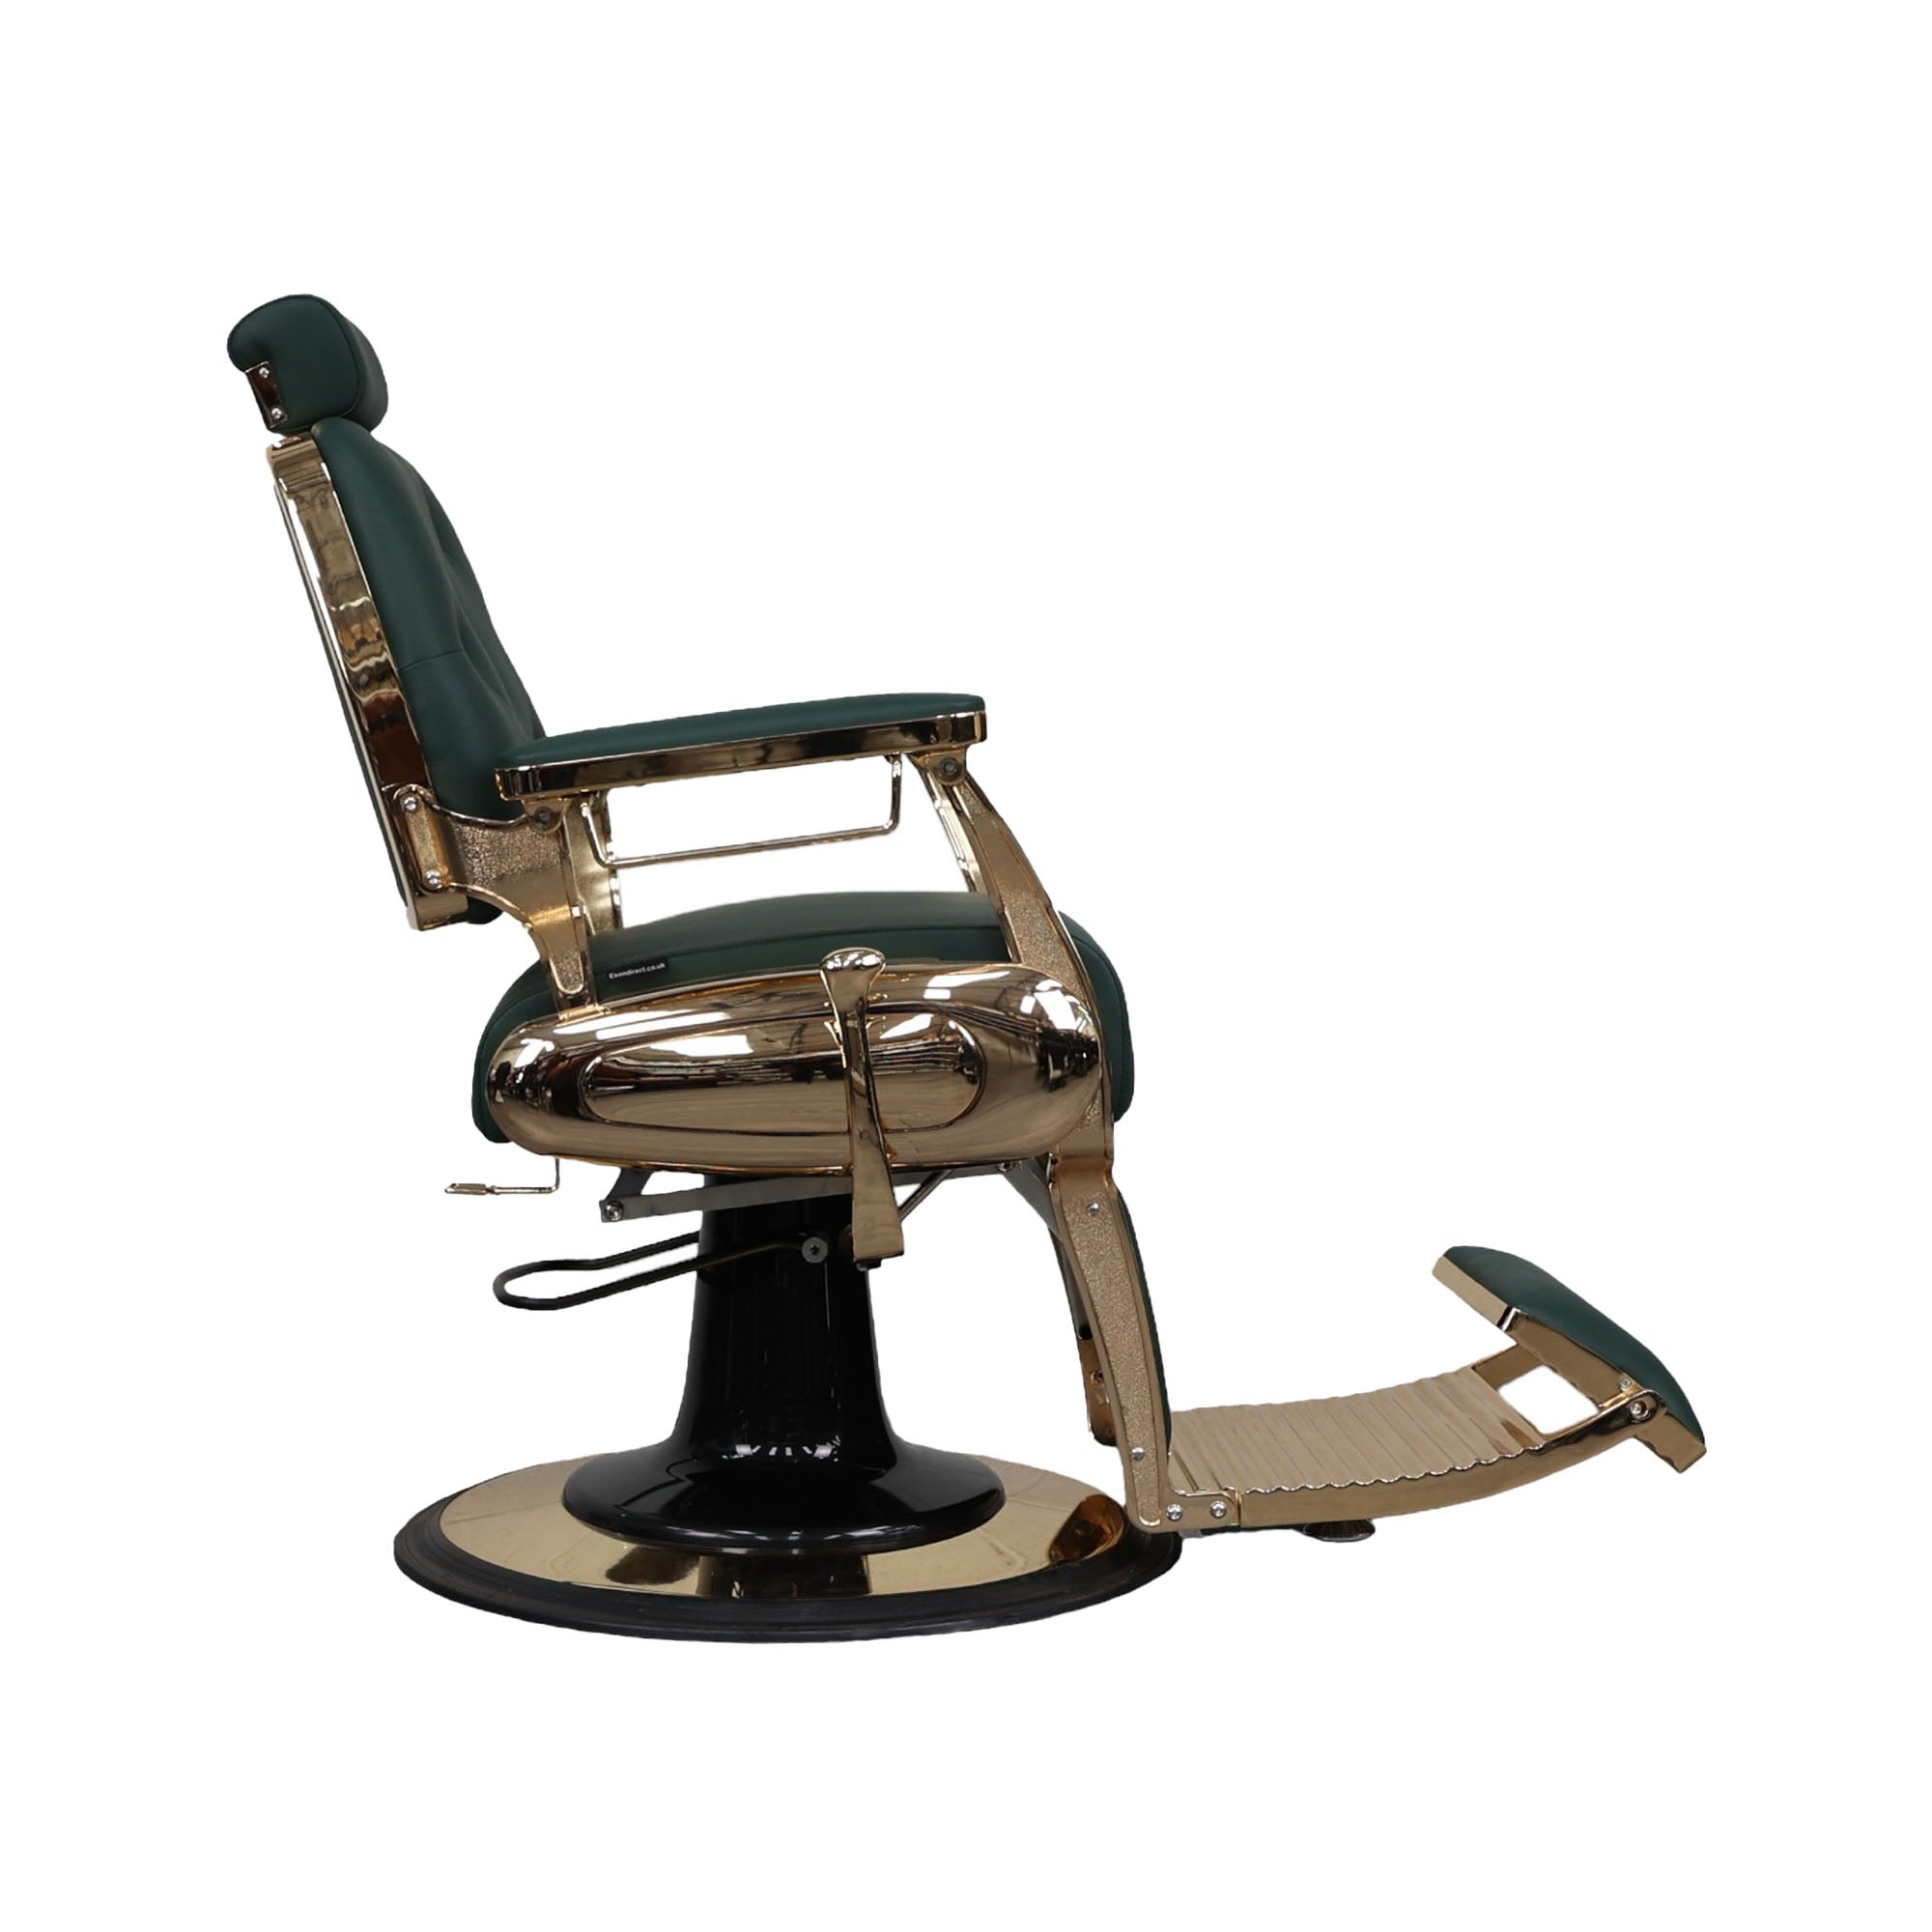 Barber Chair - Luxurious Green Leather with Gold Accents